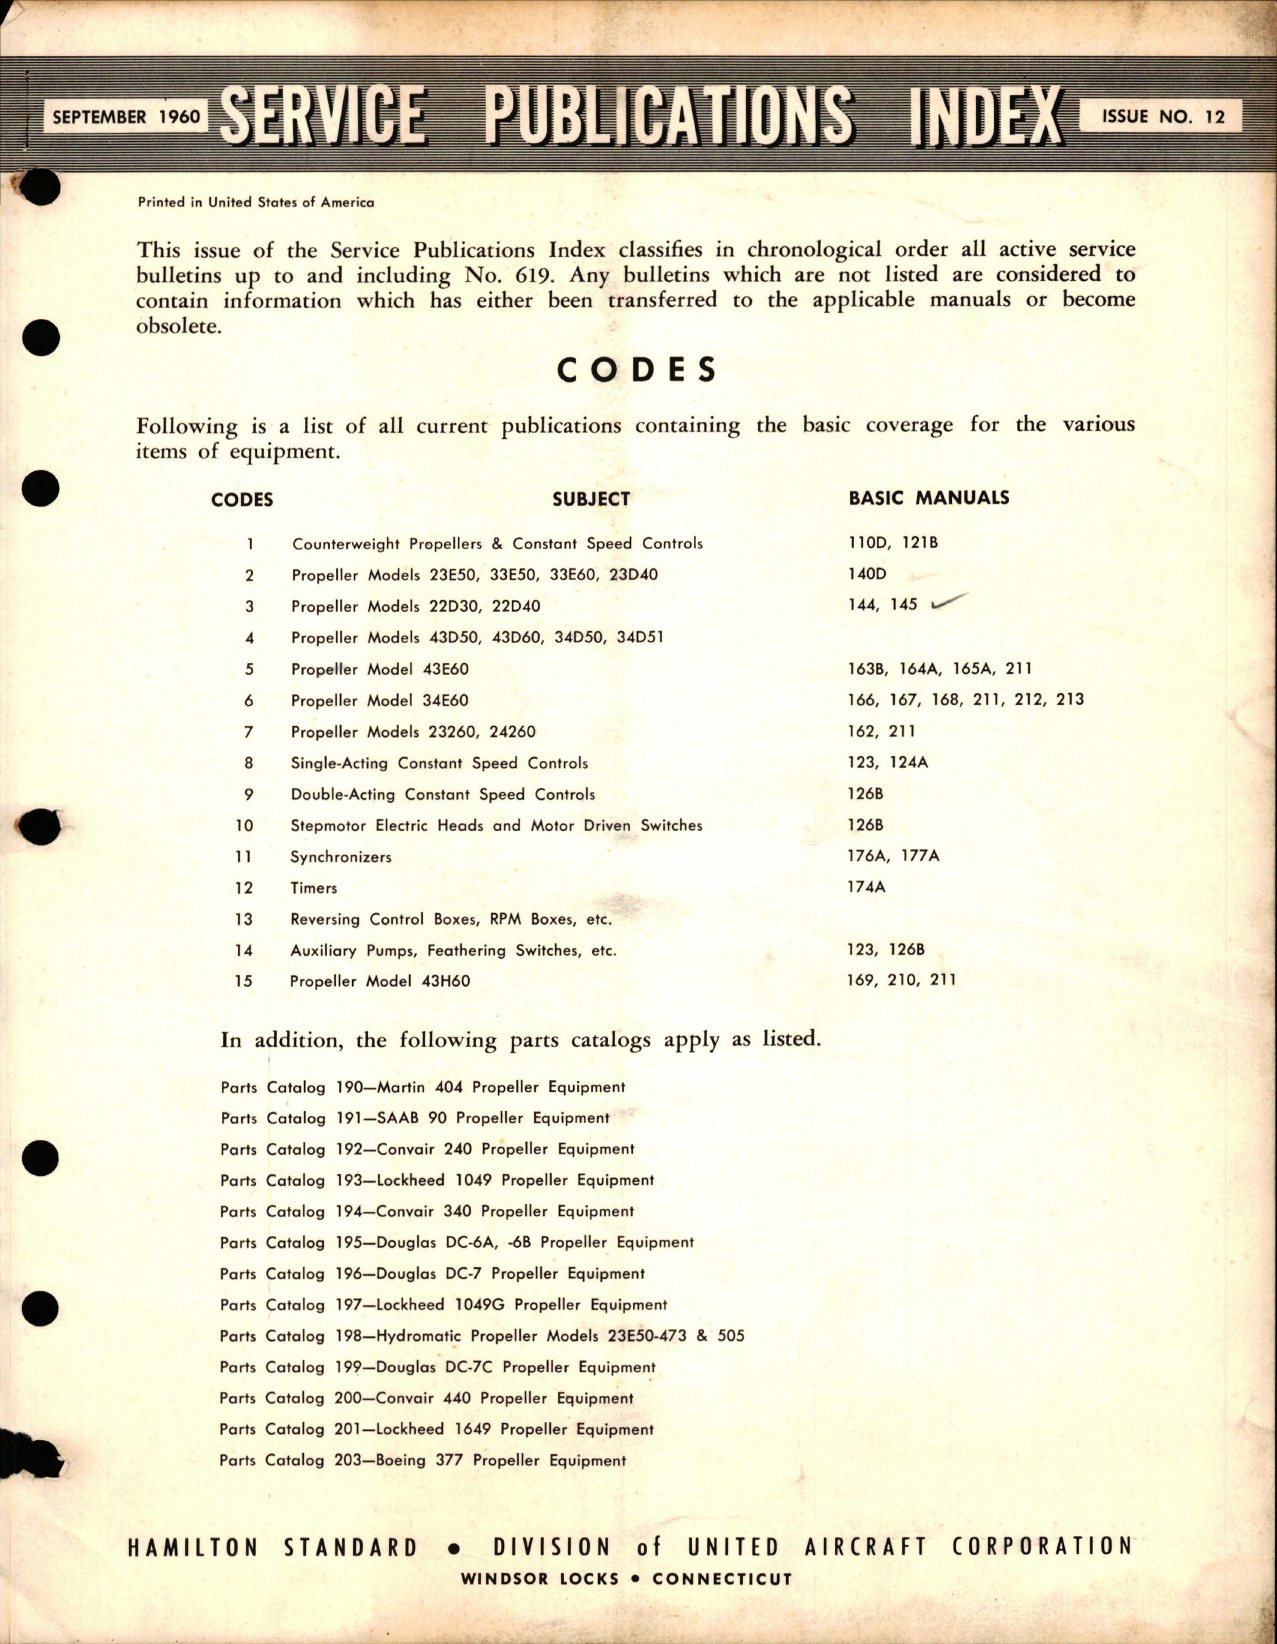 Sample page 1 from AirCorps Library document: Hamilton Standard Service Publications Index